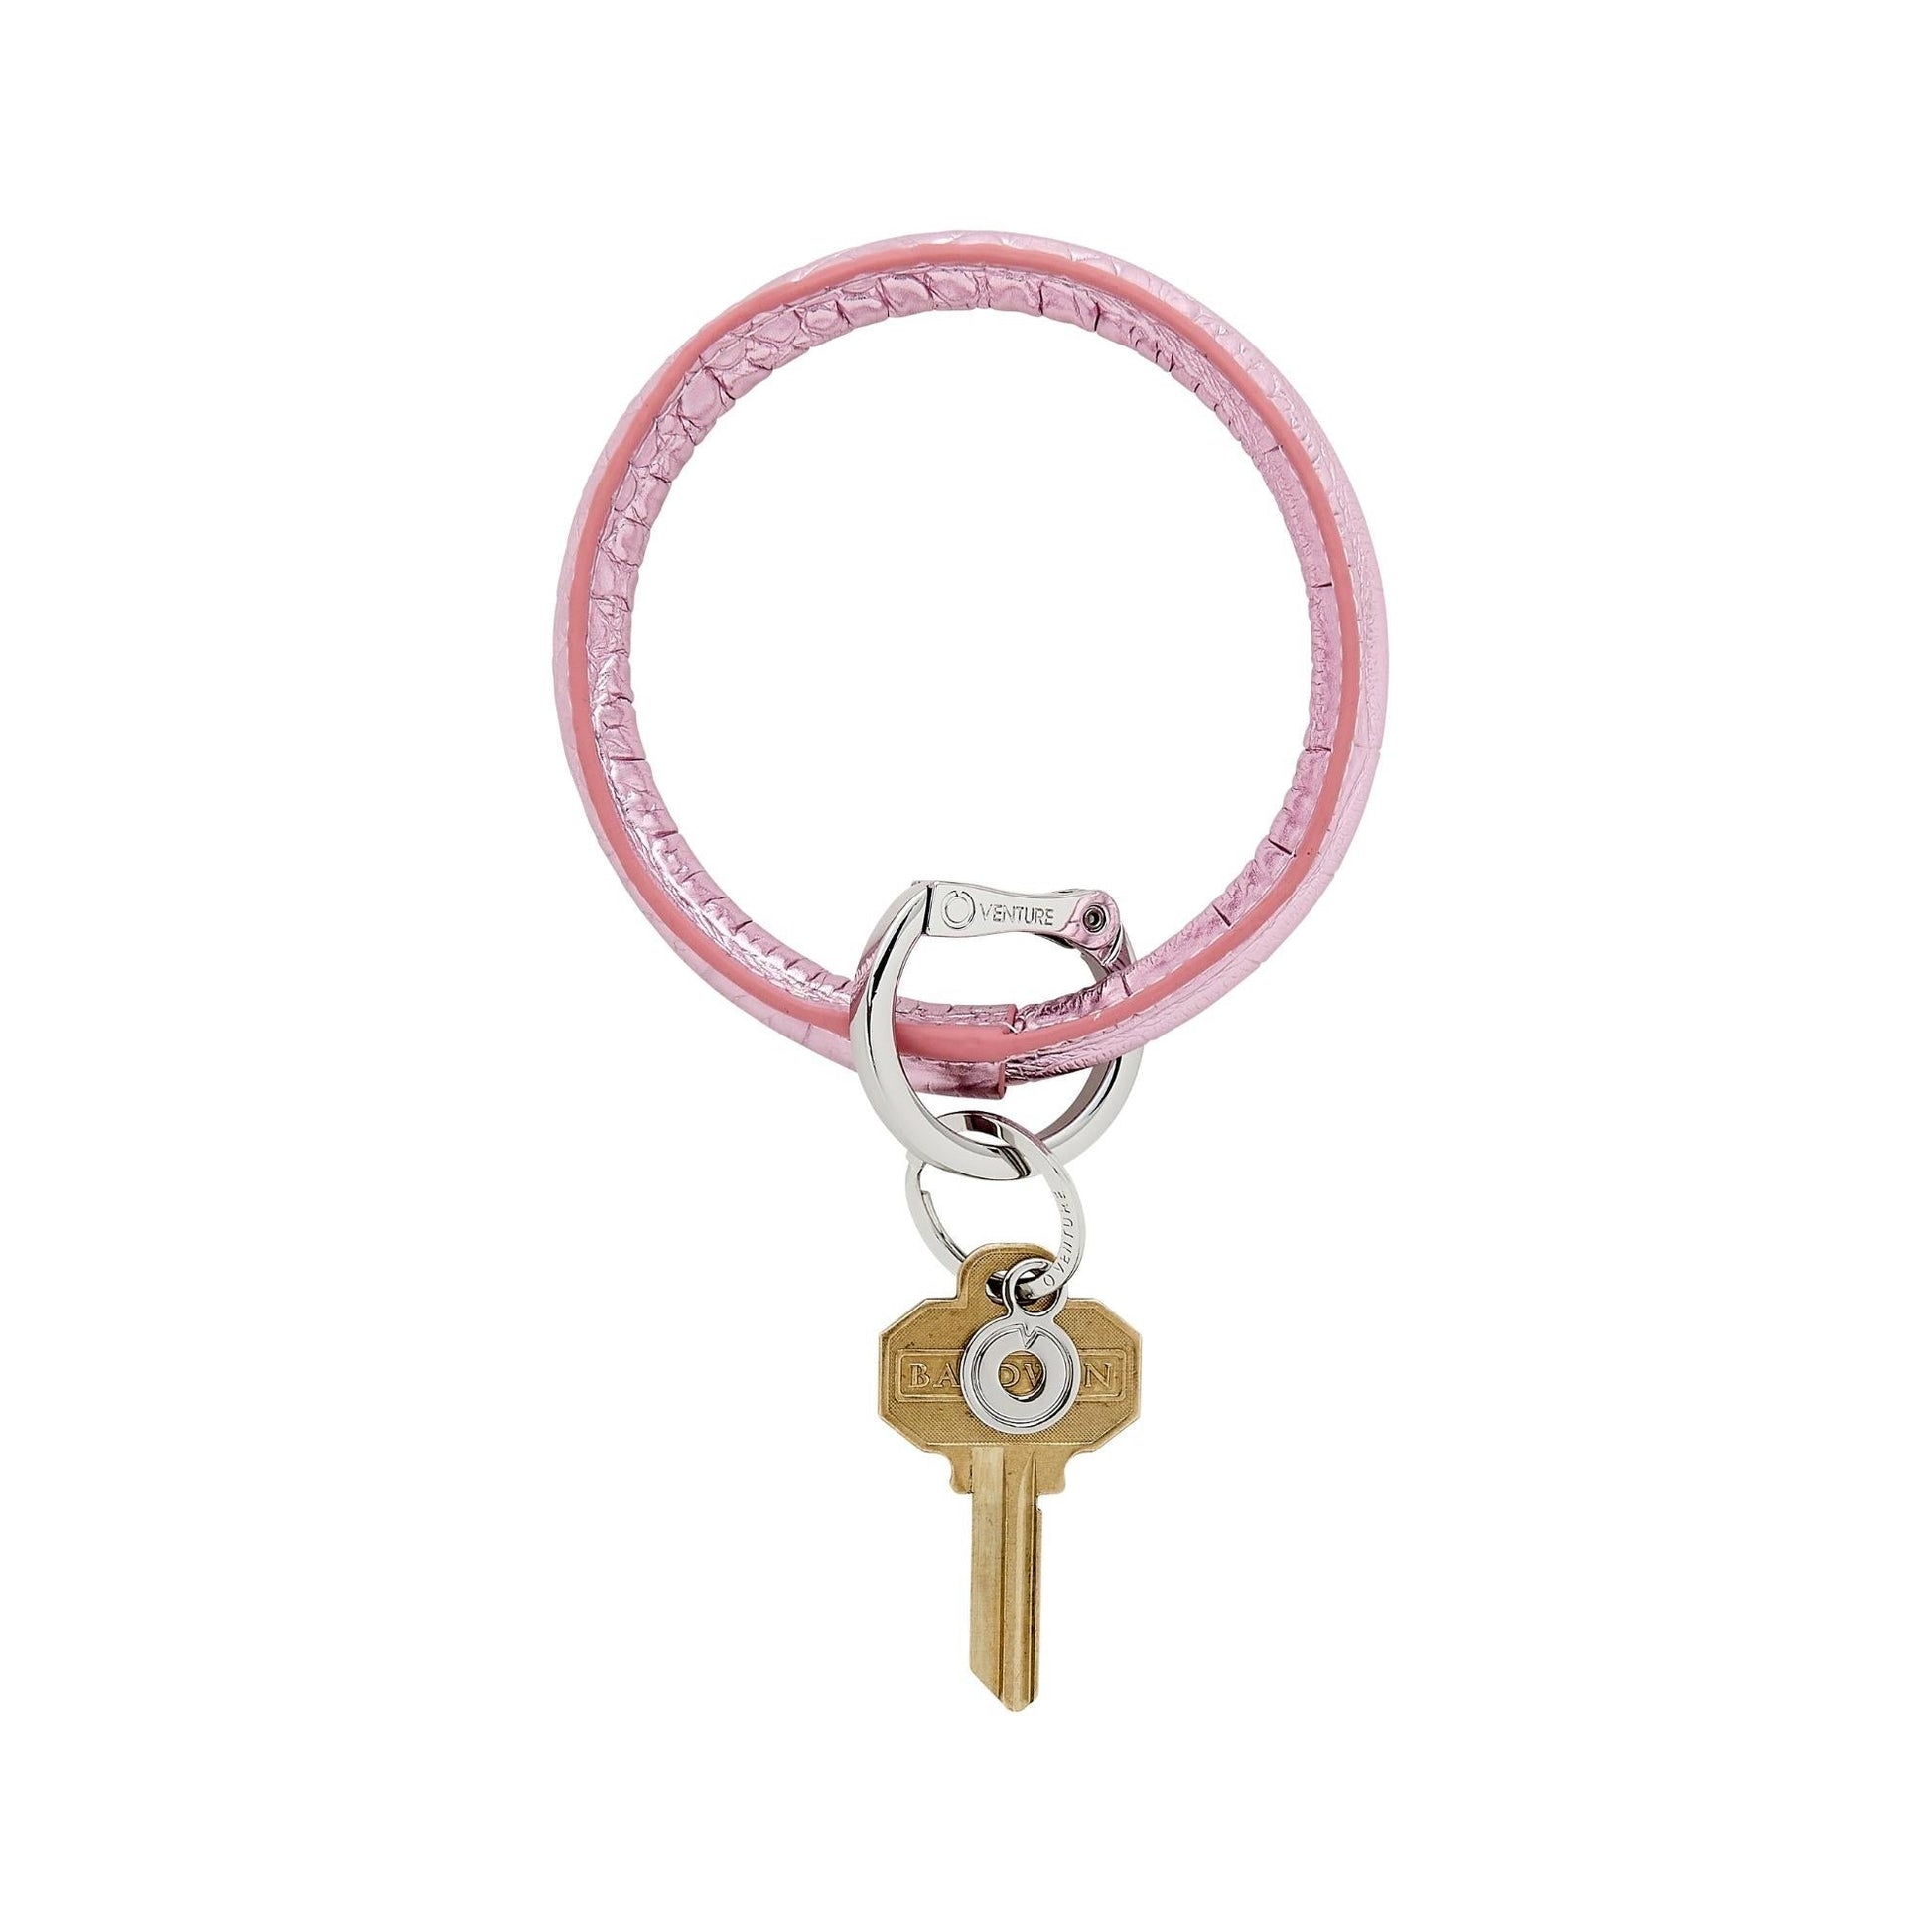 Metallic Pink Leather Croc Embossed Big O Key Ring with silver locking clasp shown on wrist